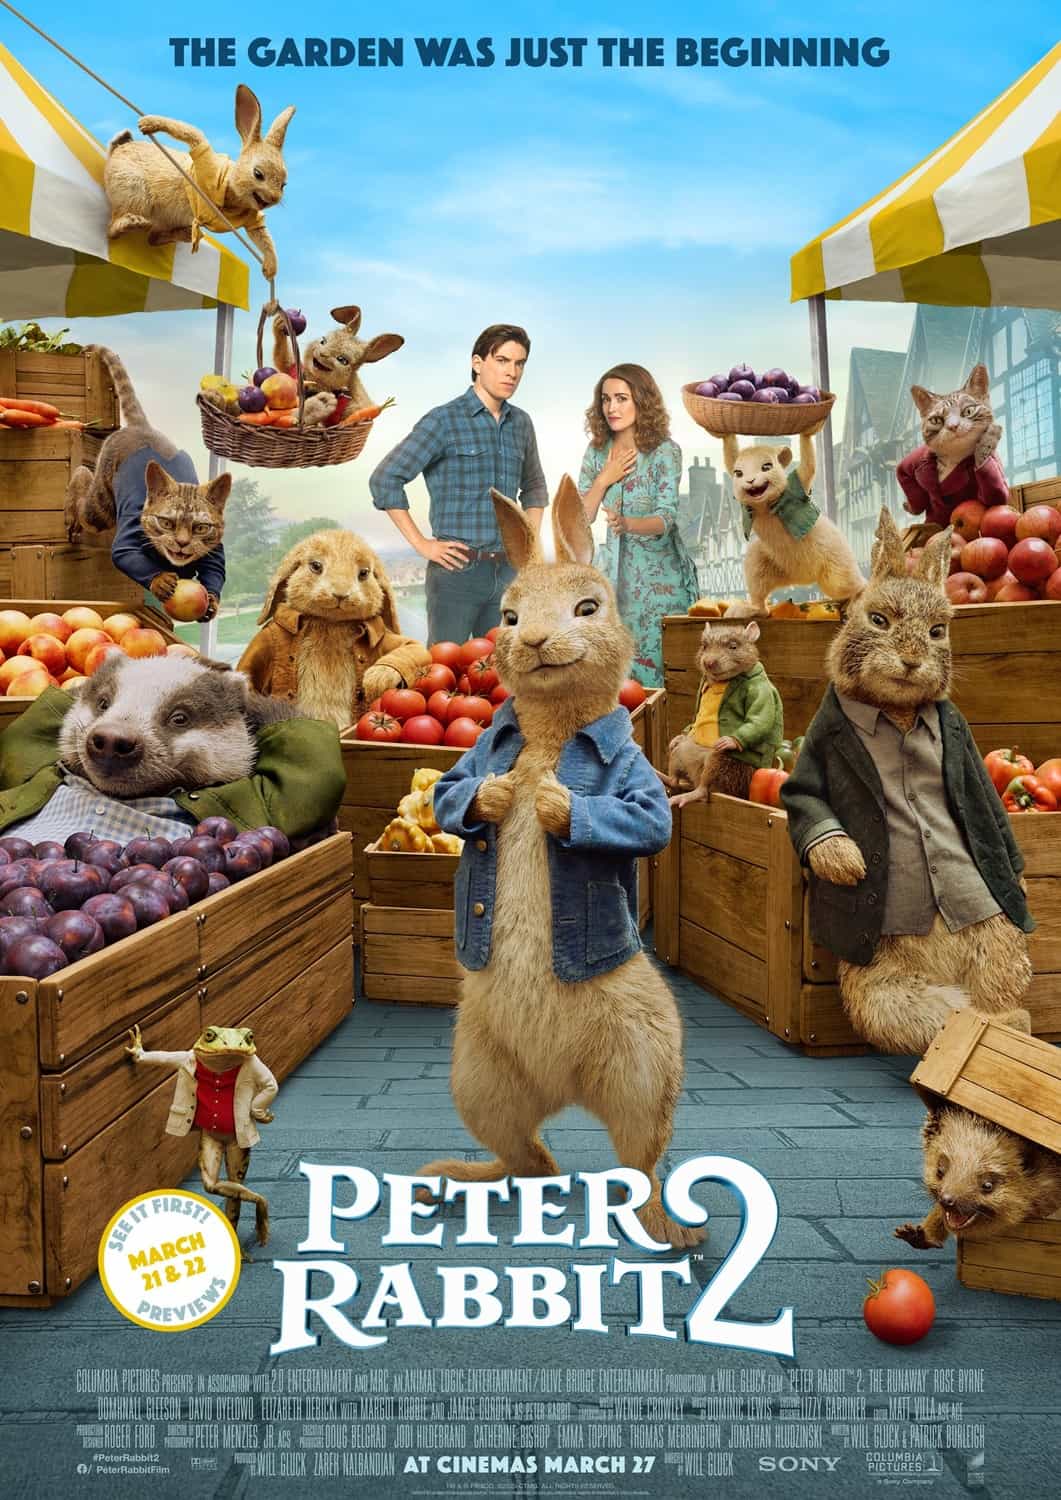 UK Box Office Weekend Report 21st - 23rd May 2021:  As the UK box office comes alive again Peter Rabbit 2 is the top movie in the country